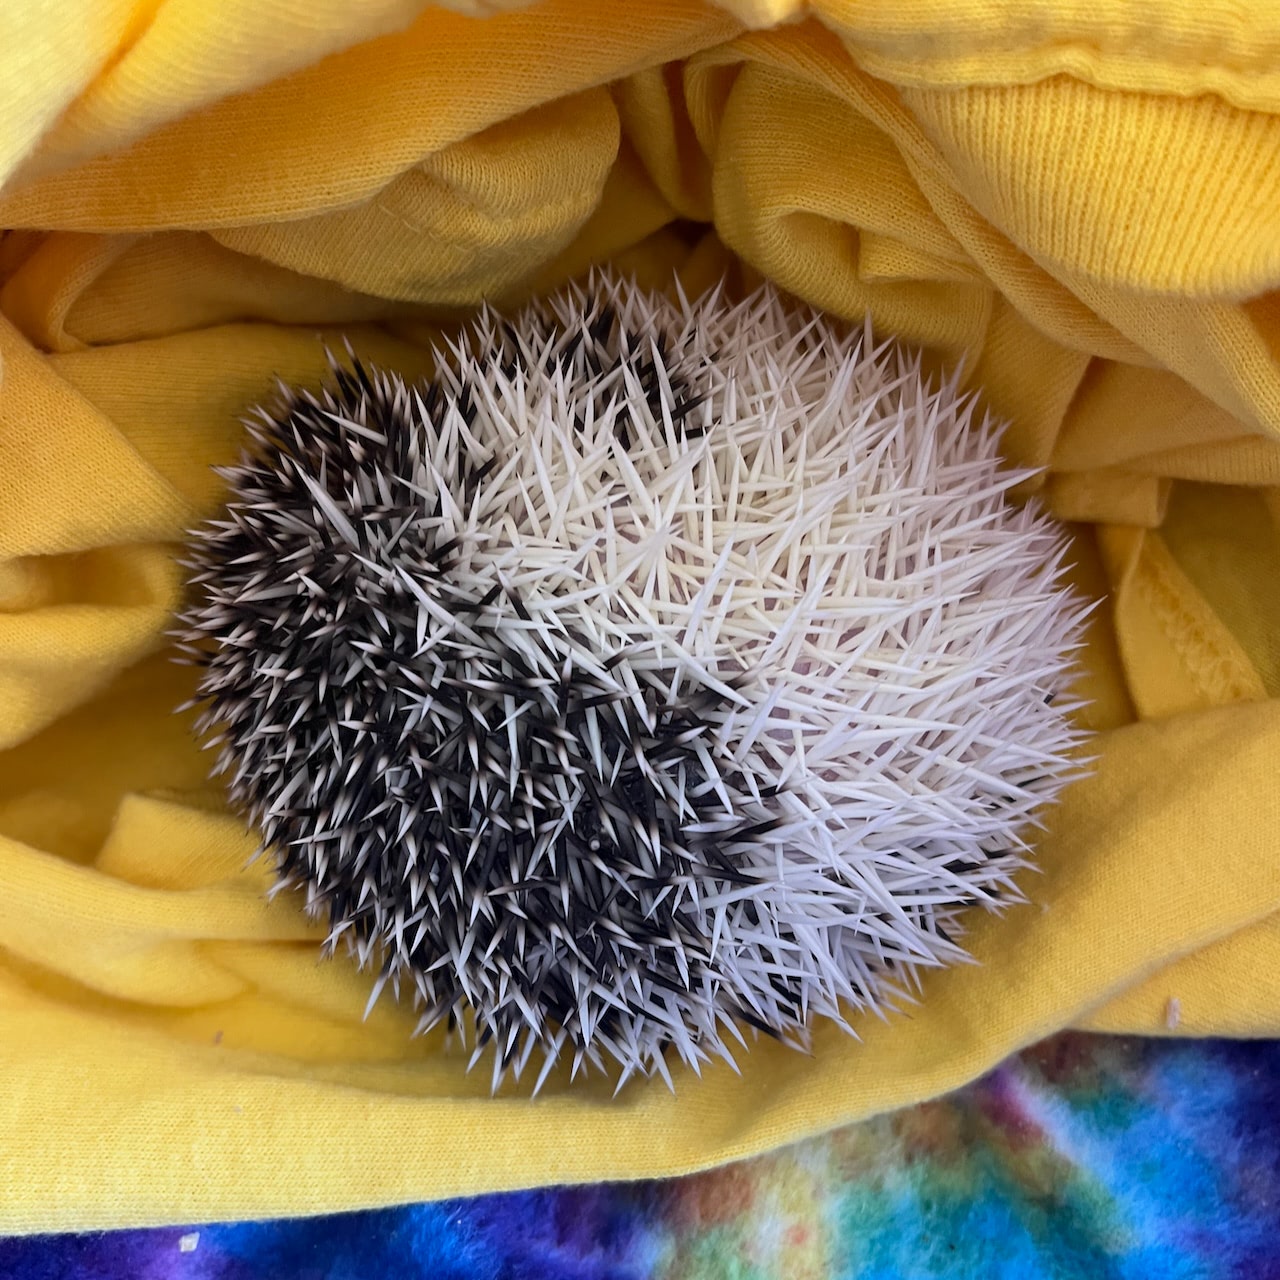 A pygmy hedgehog on its side and curled into a ball